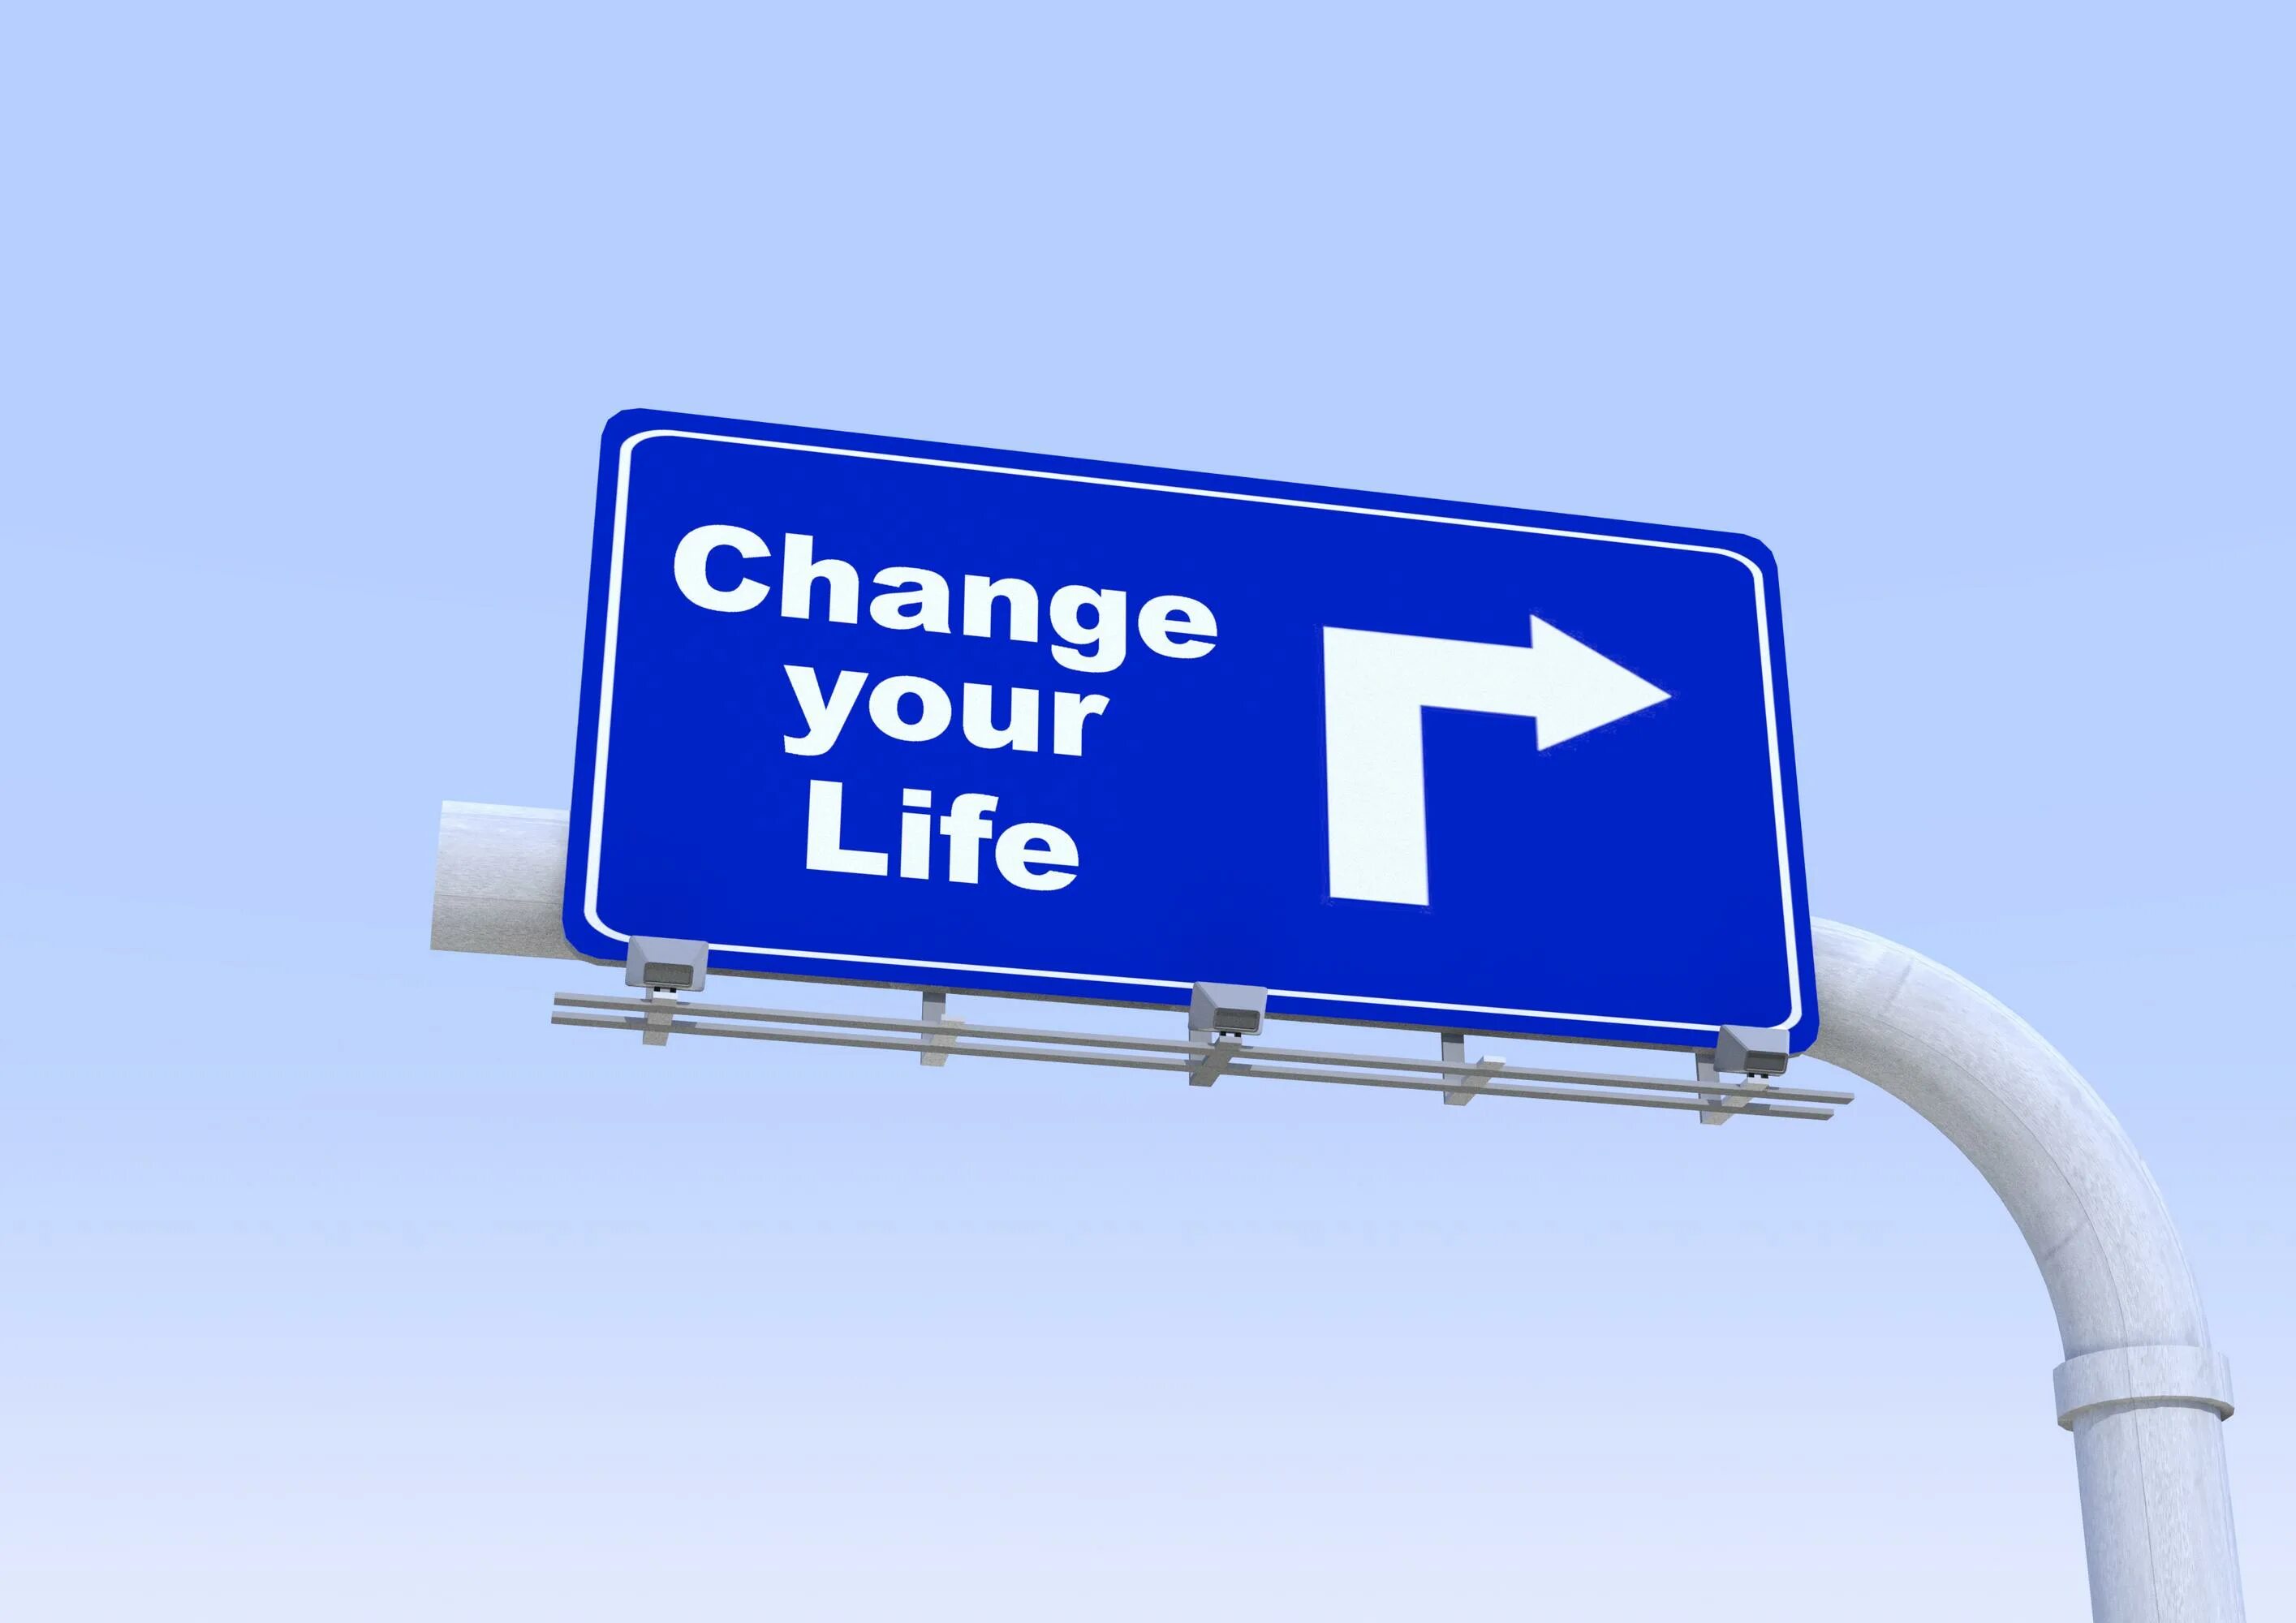 Change your Life. Life changes. Life changing. Changing your Life.